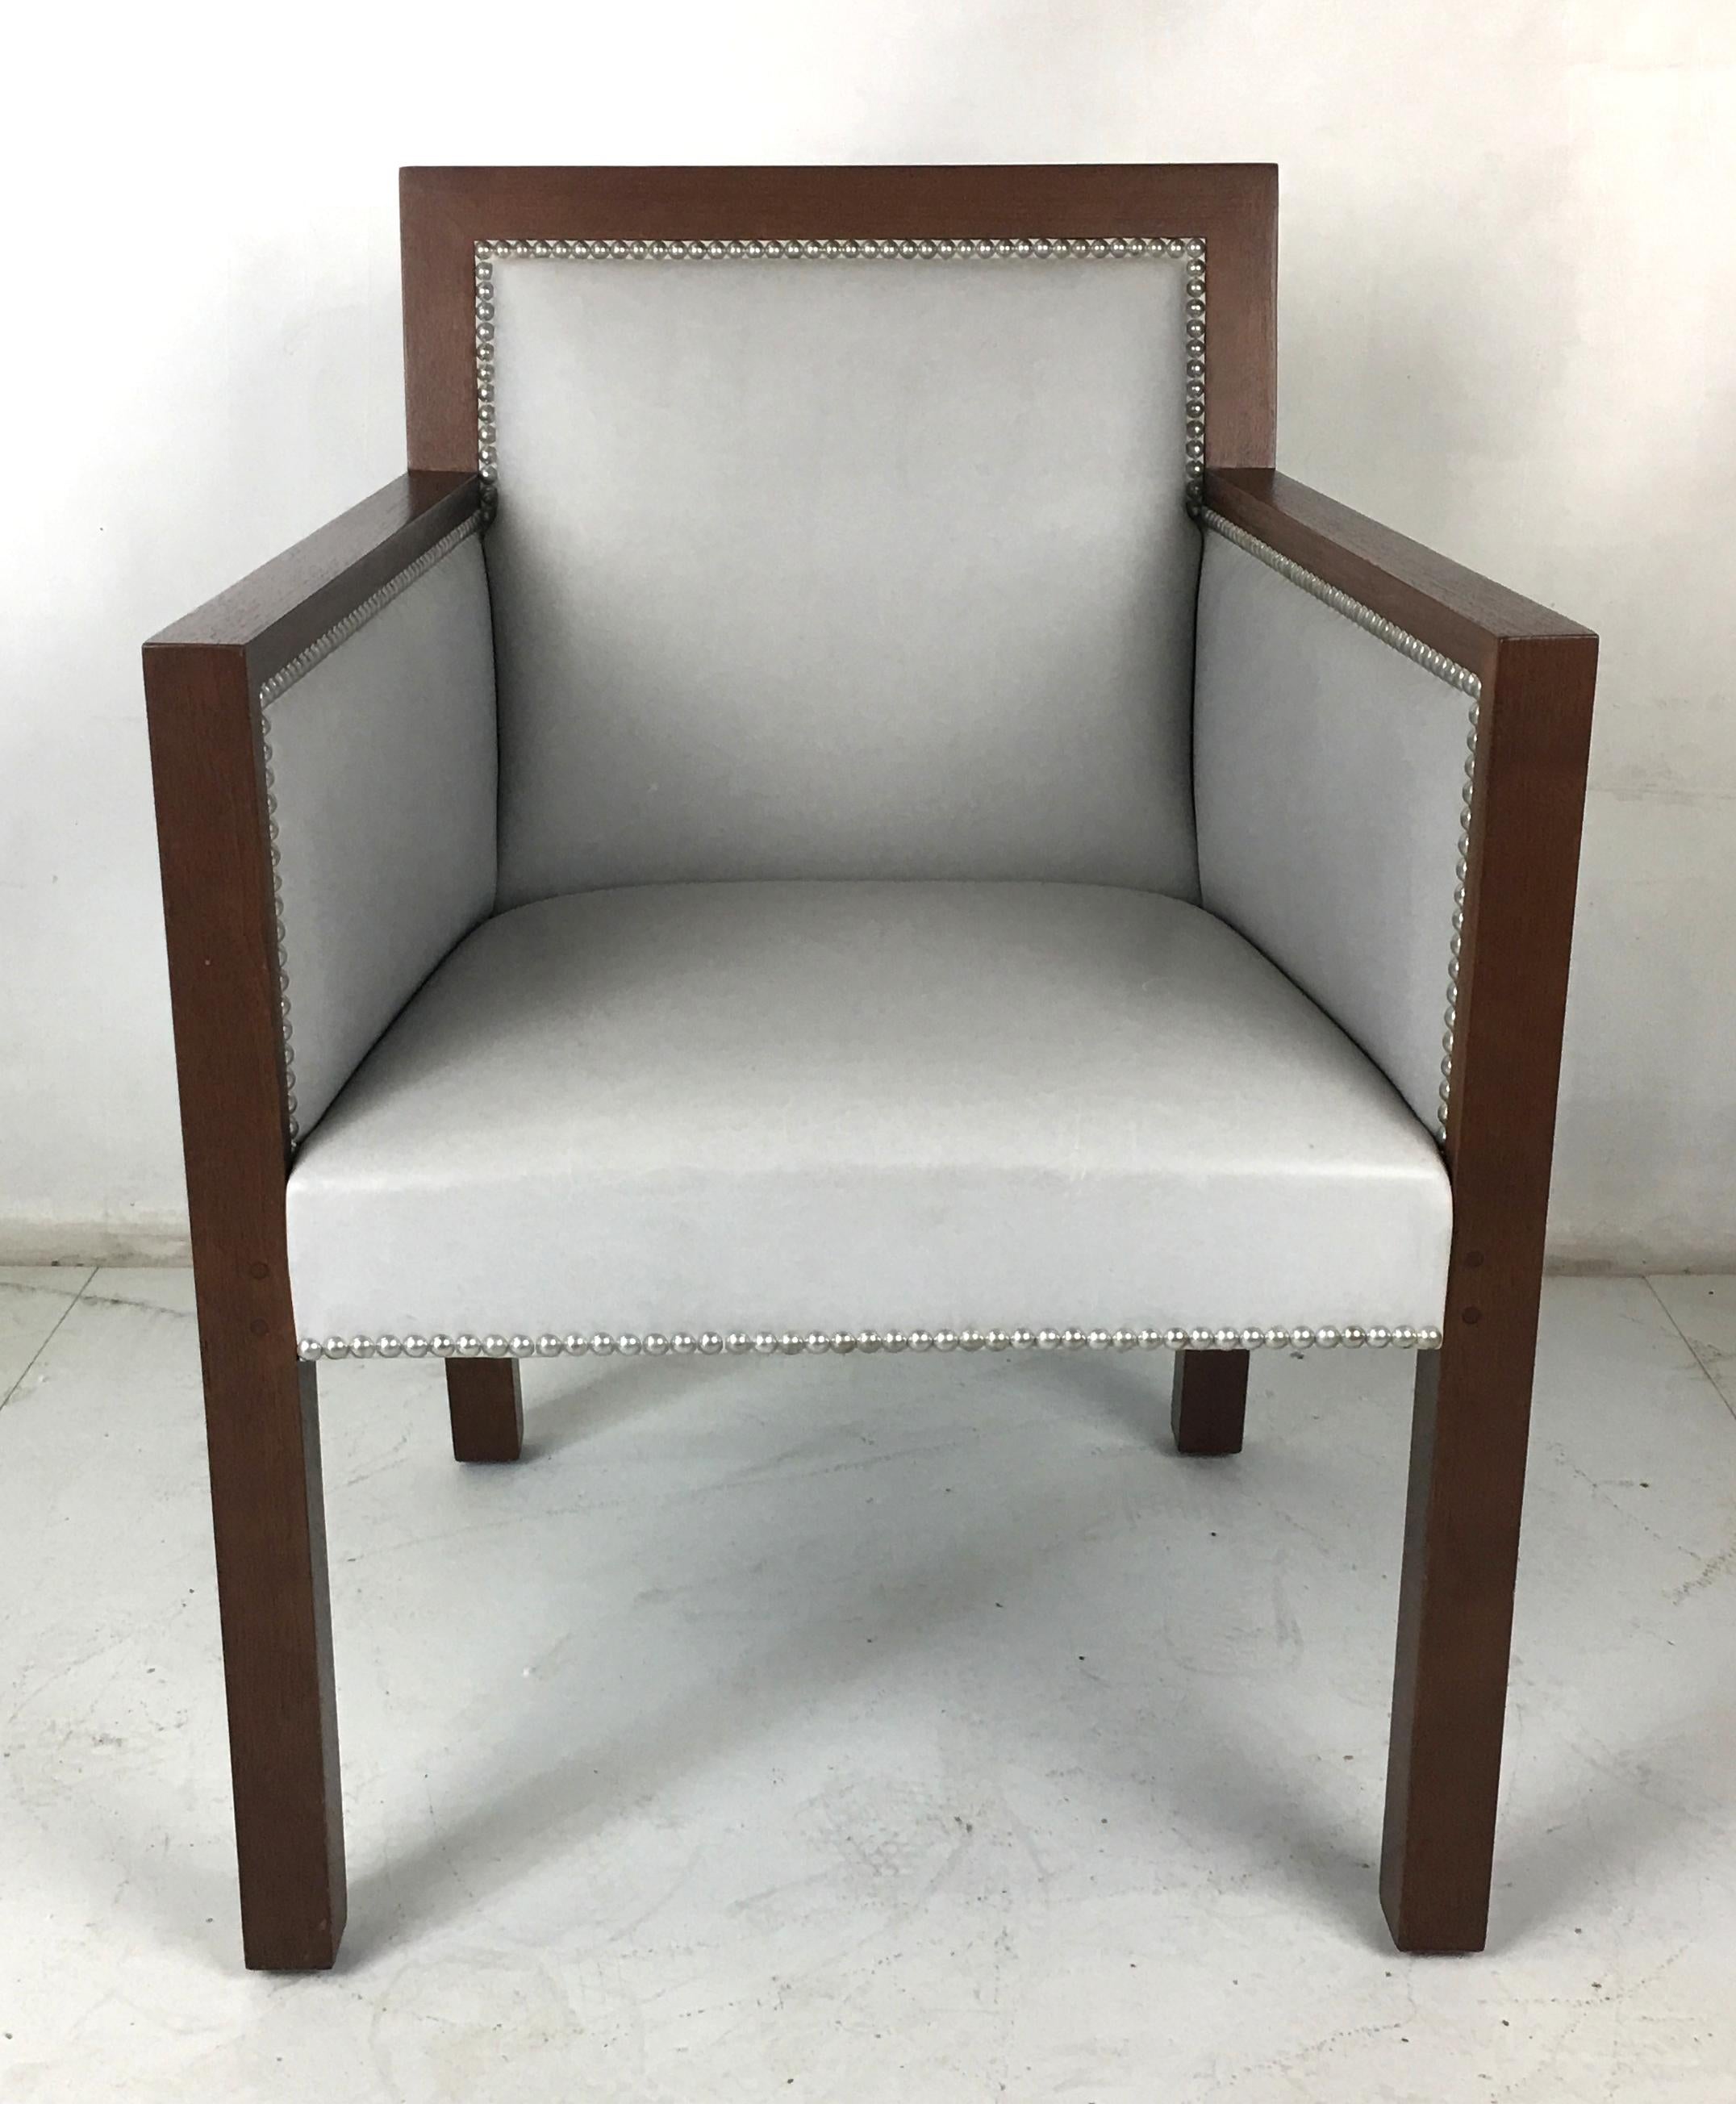 Luxe set of four mahogany and leather dining armchairs by John Hutton for Sutherland. The stout frames are upholstered in light grey glove leather with nickel nailhead trim, which can be kept or replaced with leather trim.